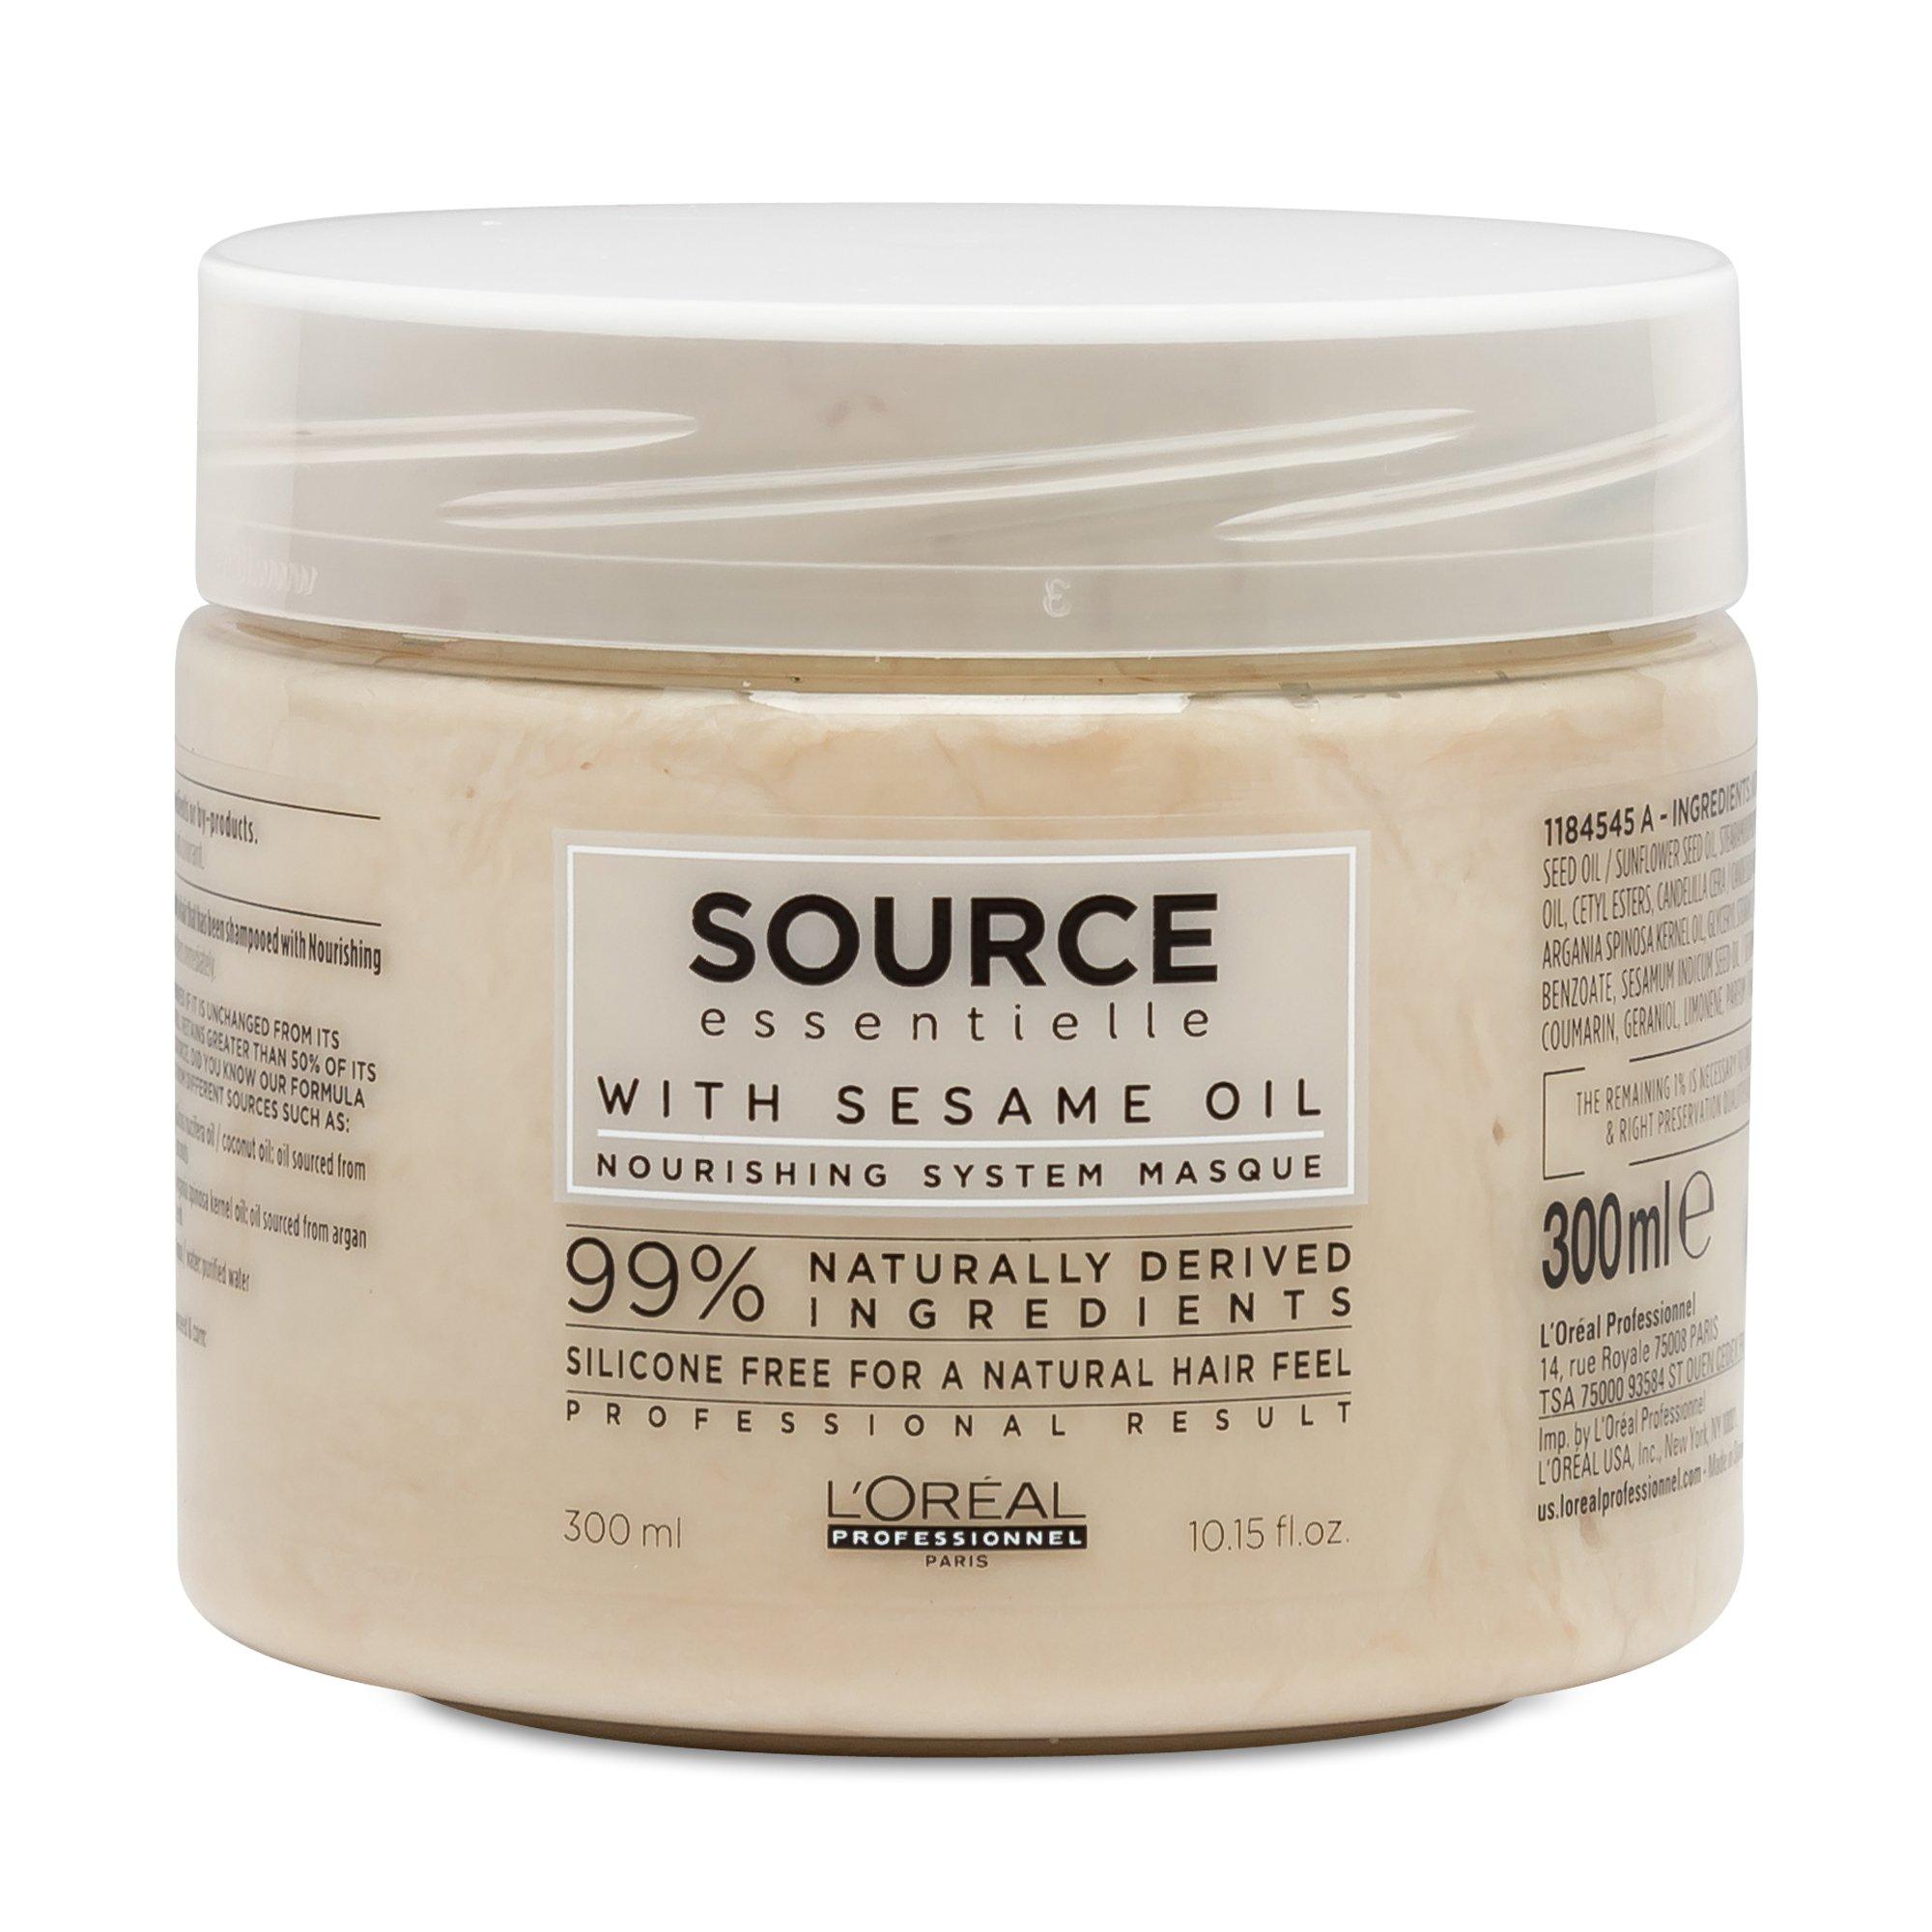 Image of Source Essentielle Nourishing System Masque For Dry, Sensitized Hair - 300ml